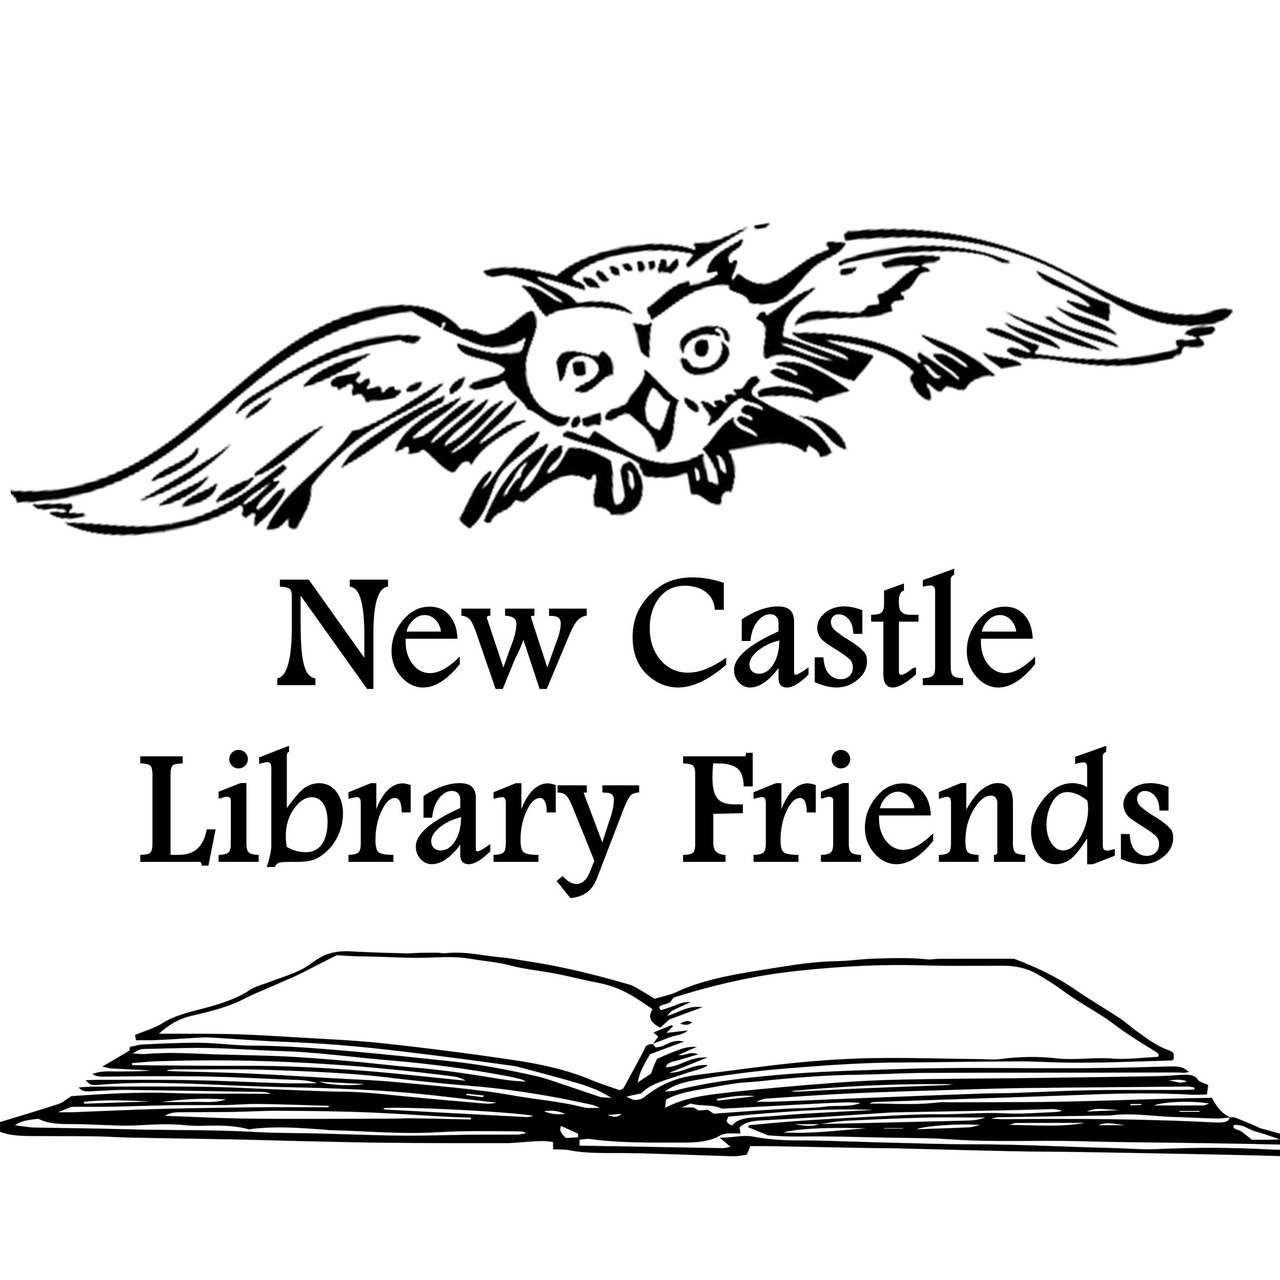 Artwork for New Castle Library Friends